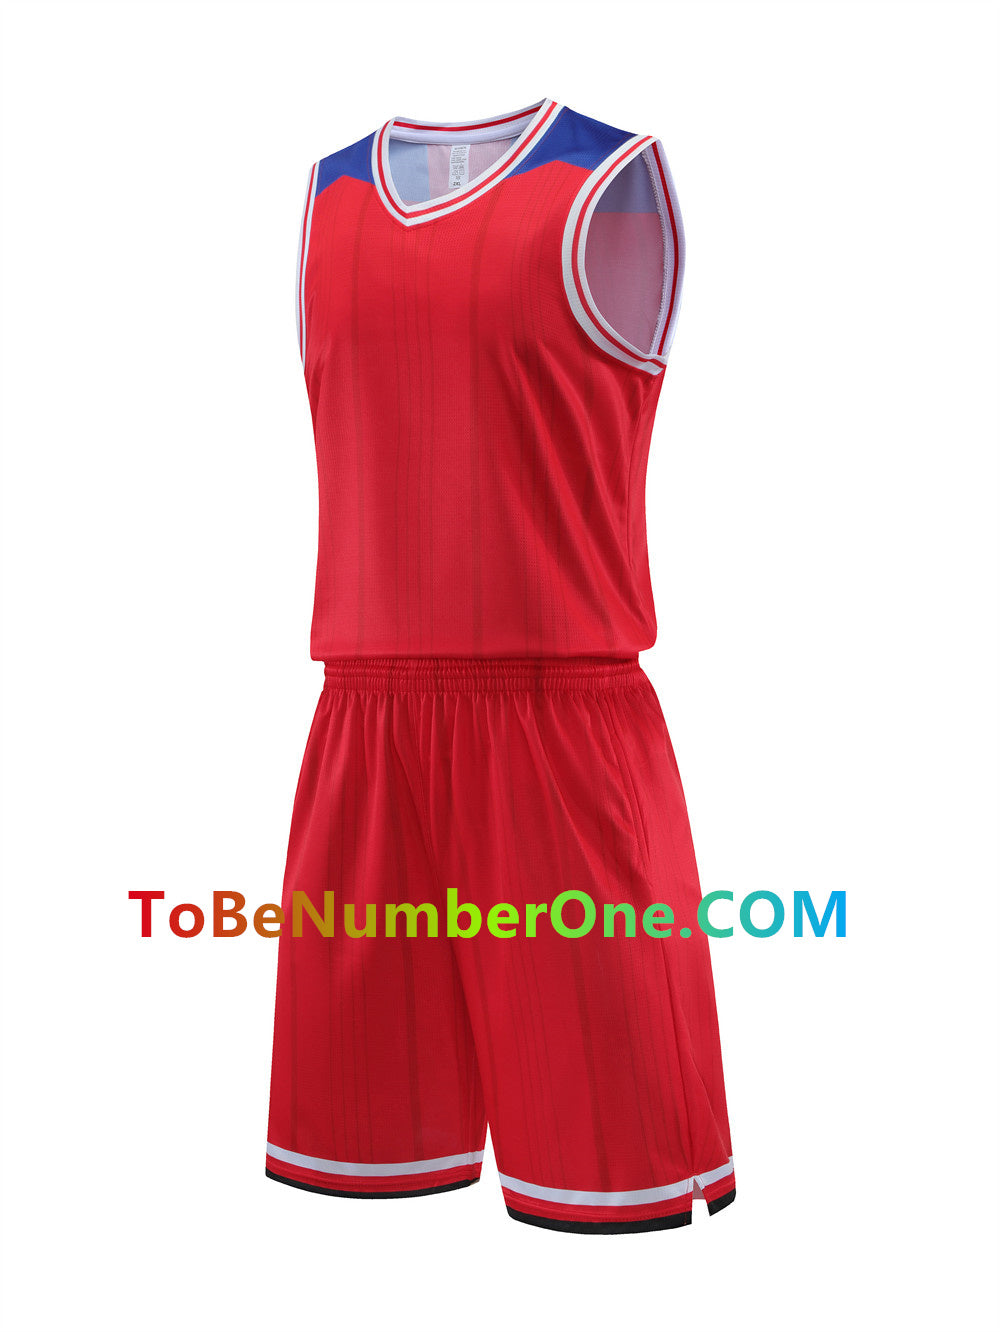 Customize instock High Quality Quick-drying basketball uniforms print with team name , player and number.  jerseys&shorts with pocket 232#